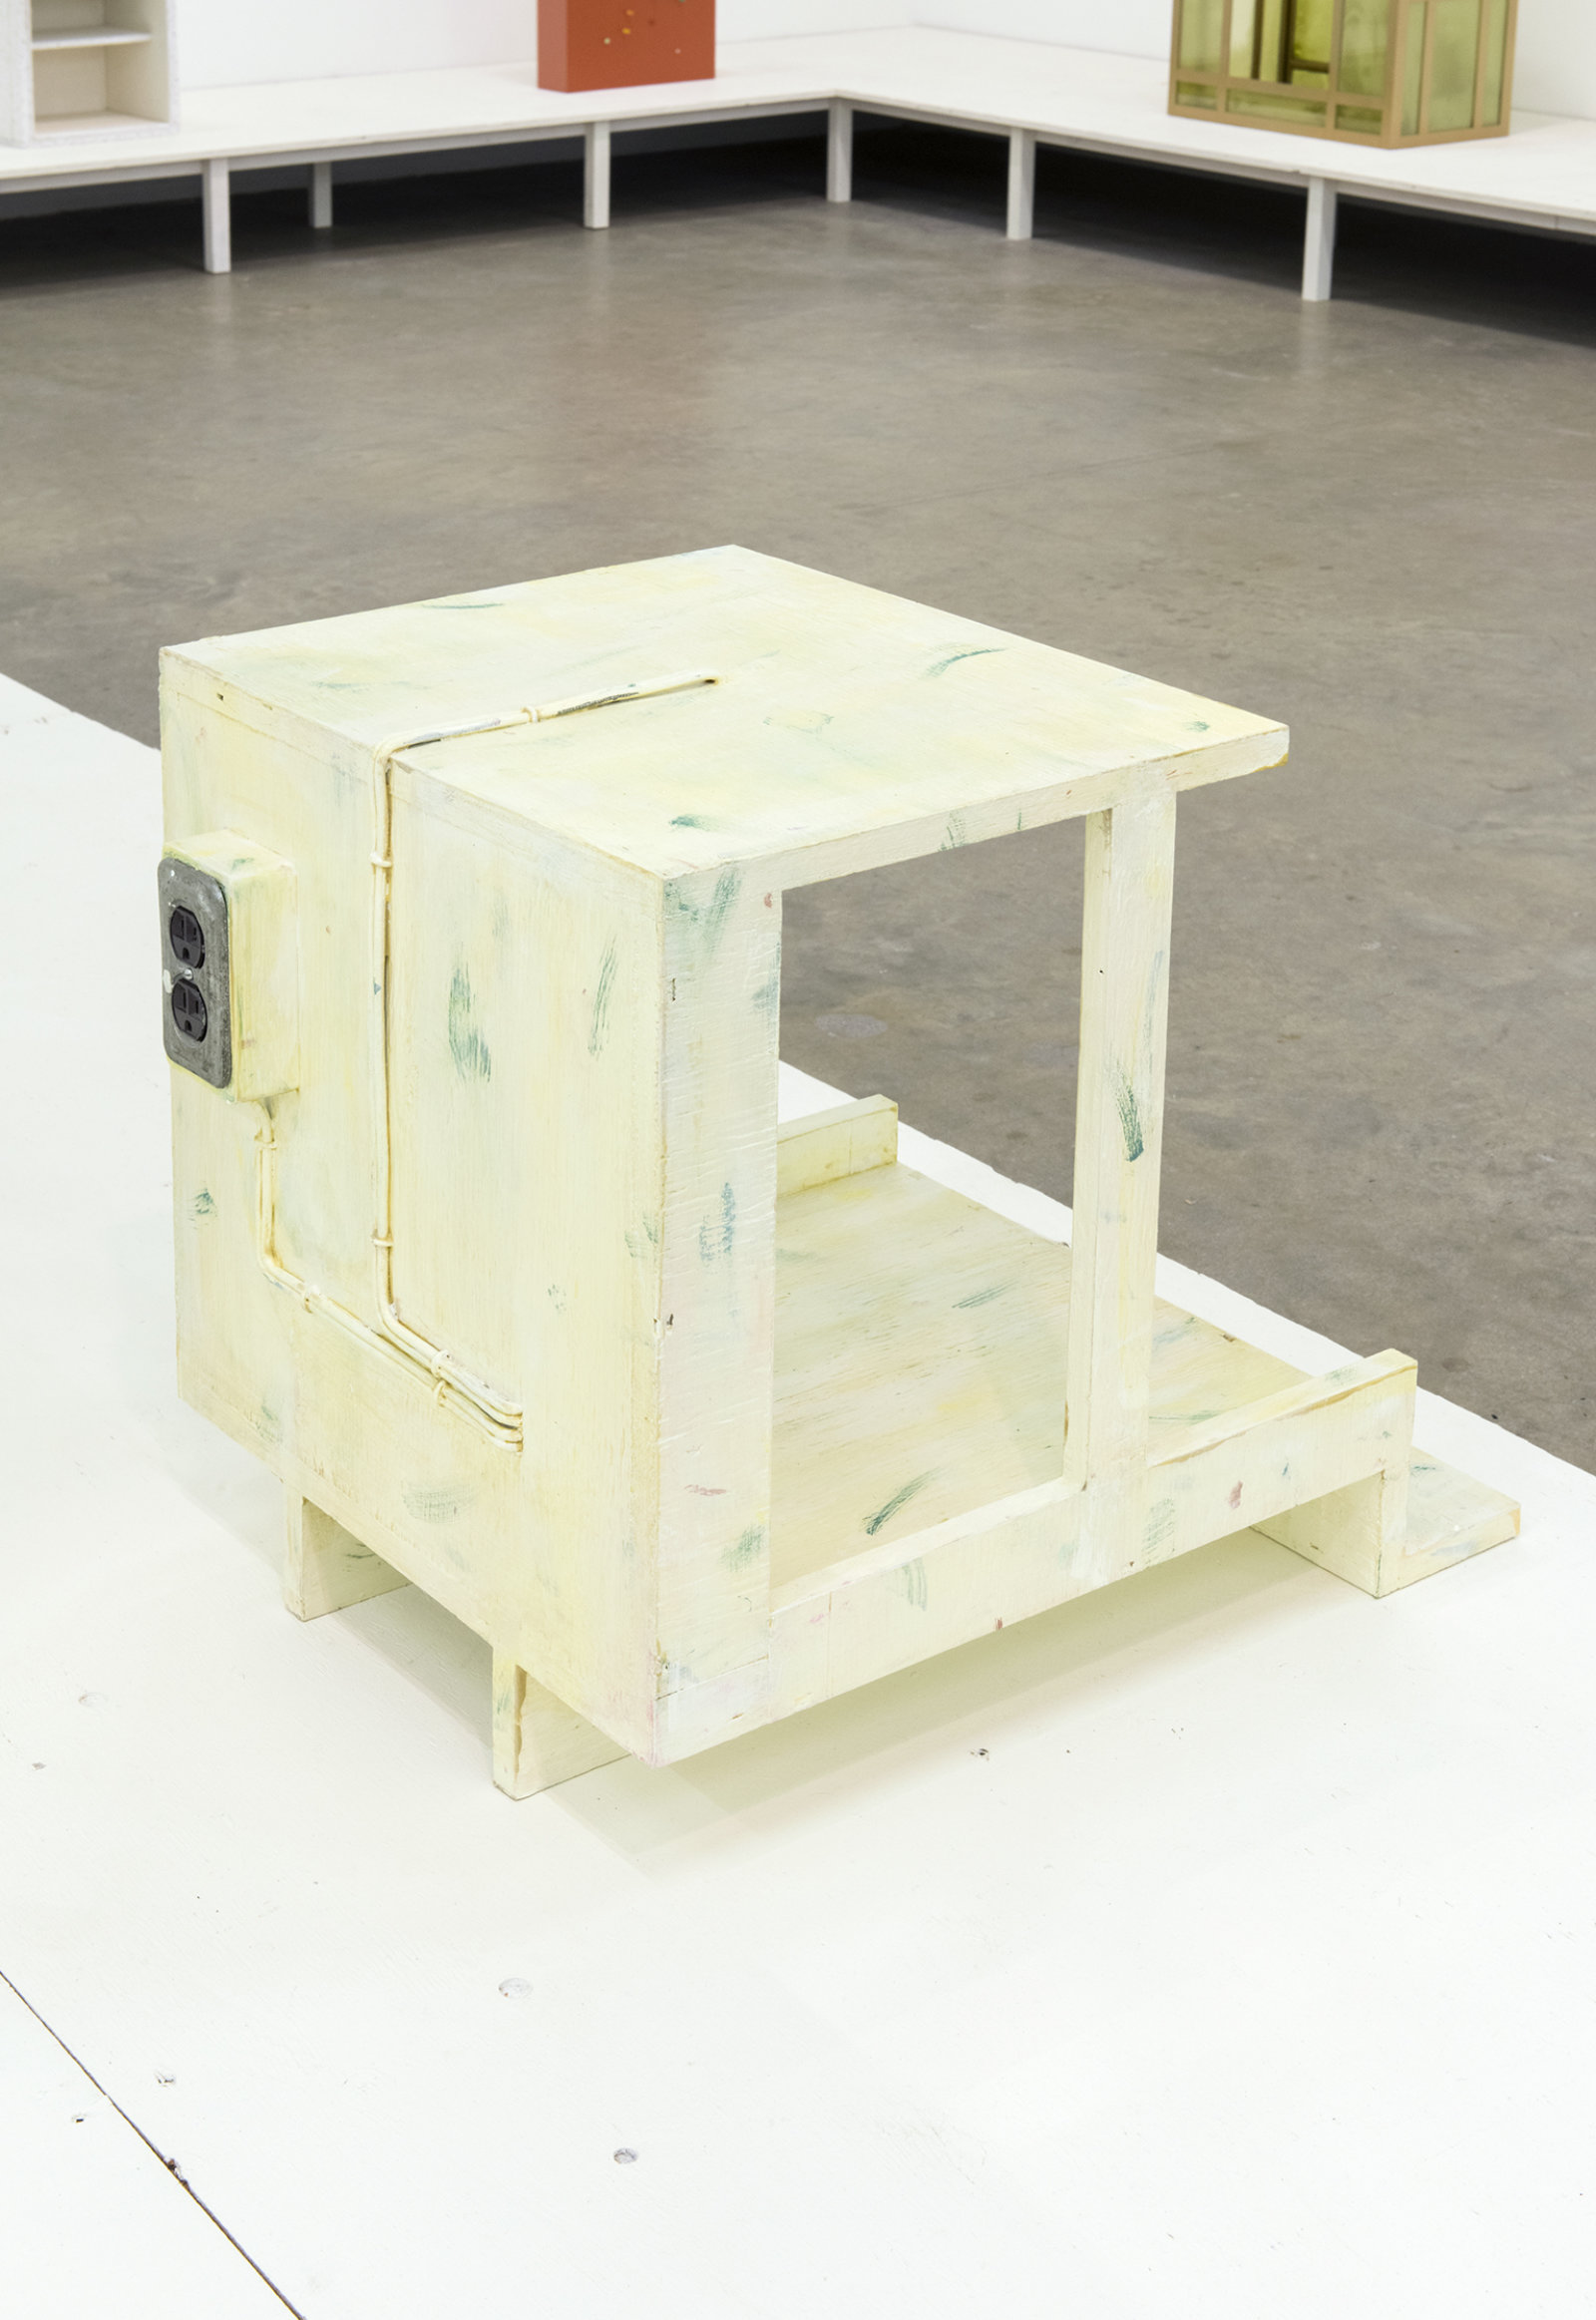 Ashes Withyman, E12 e, 2013, plywood, electrical components, paint, 20 x 23 x 18 in. (51 x 57 x 46 cm)